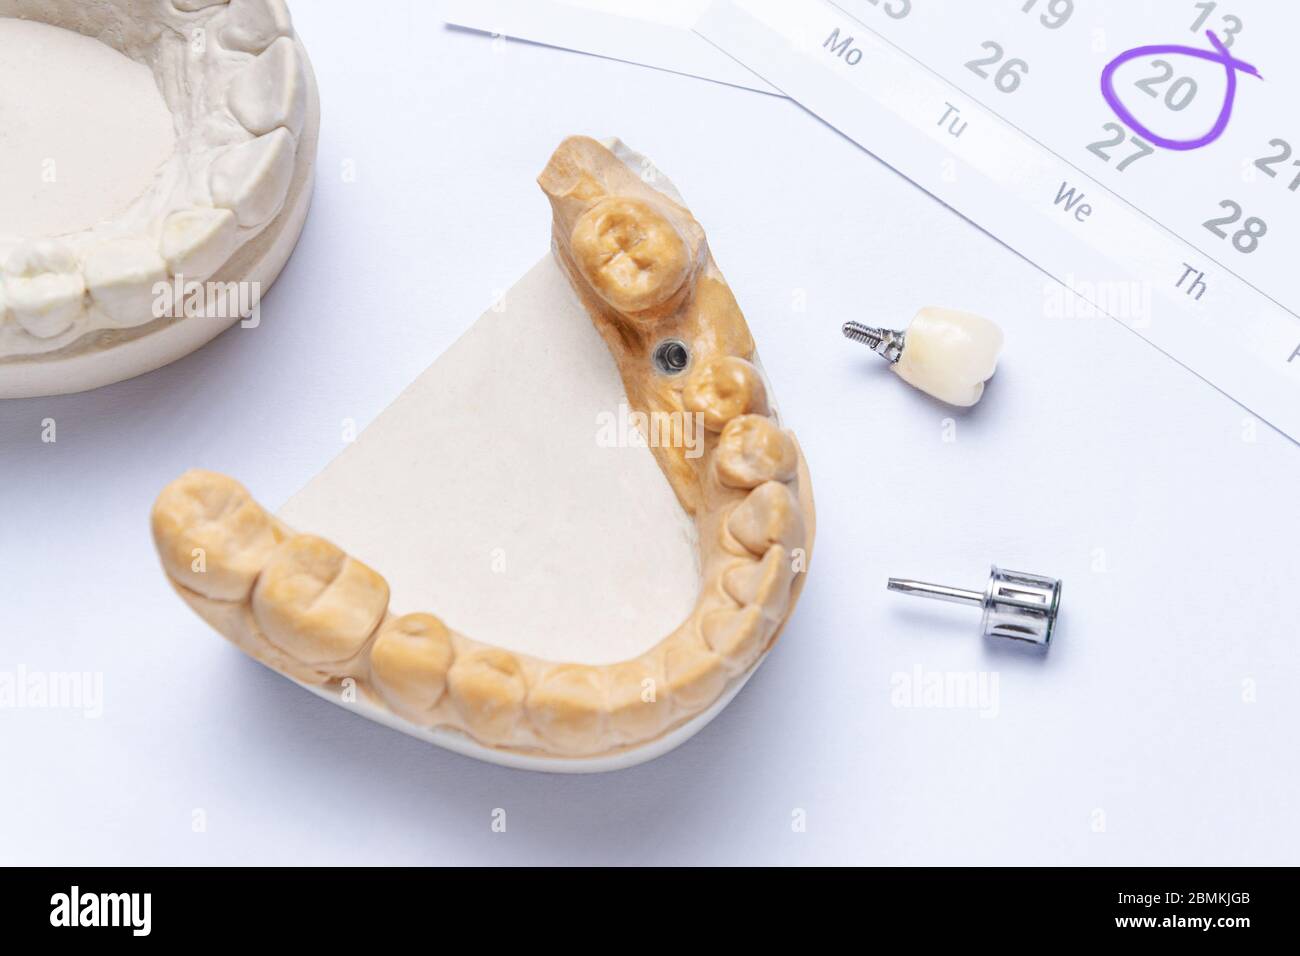 a dental implant with a ceramic crown and a dental instrument lie on a white background, in the upper right calendar indicating a visit to the dentist Stock Photo